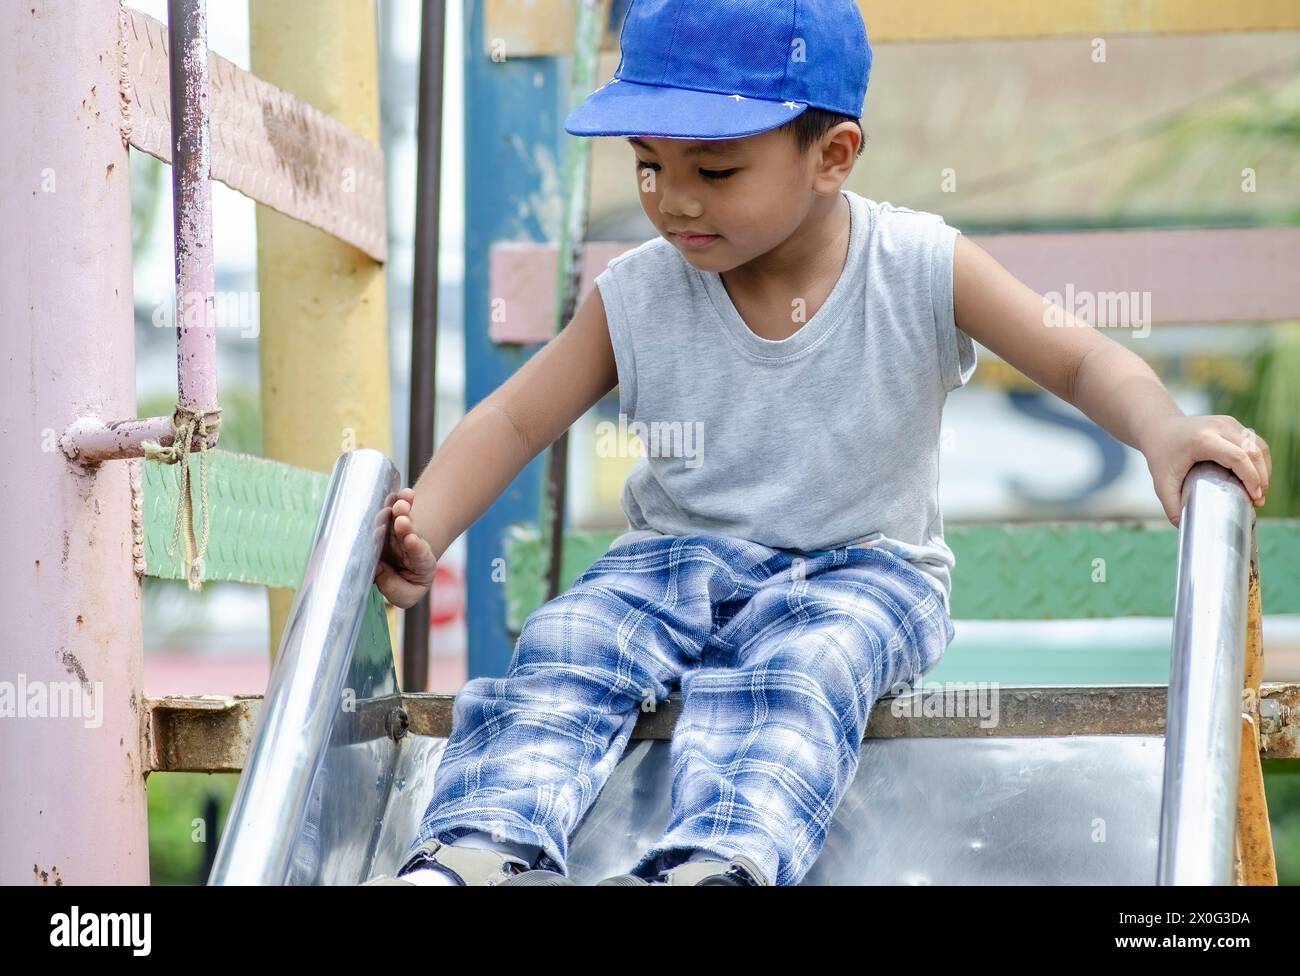 Pre-school boy about to slide down the slide in the playground Stock Photo